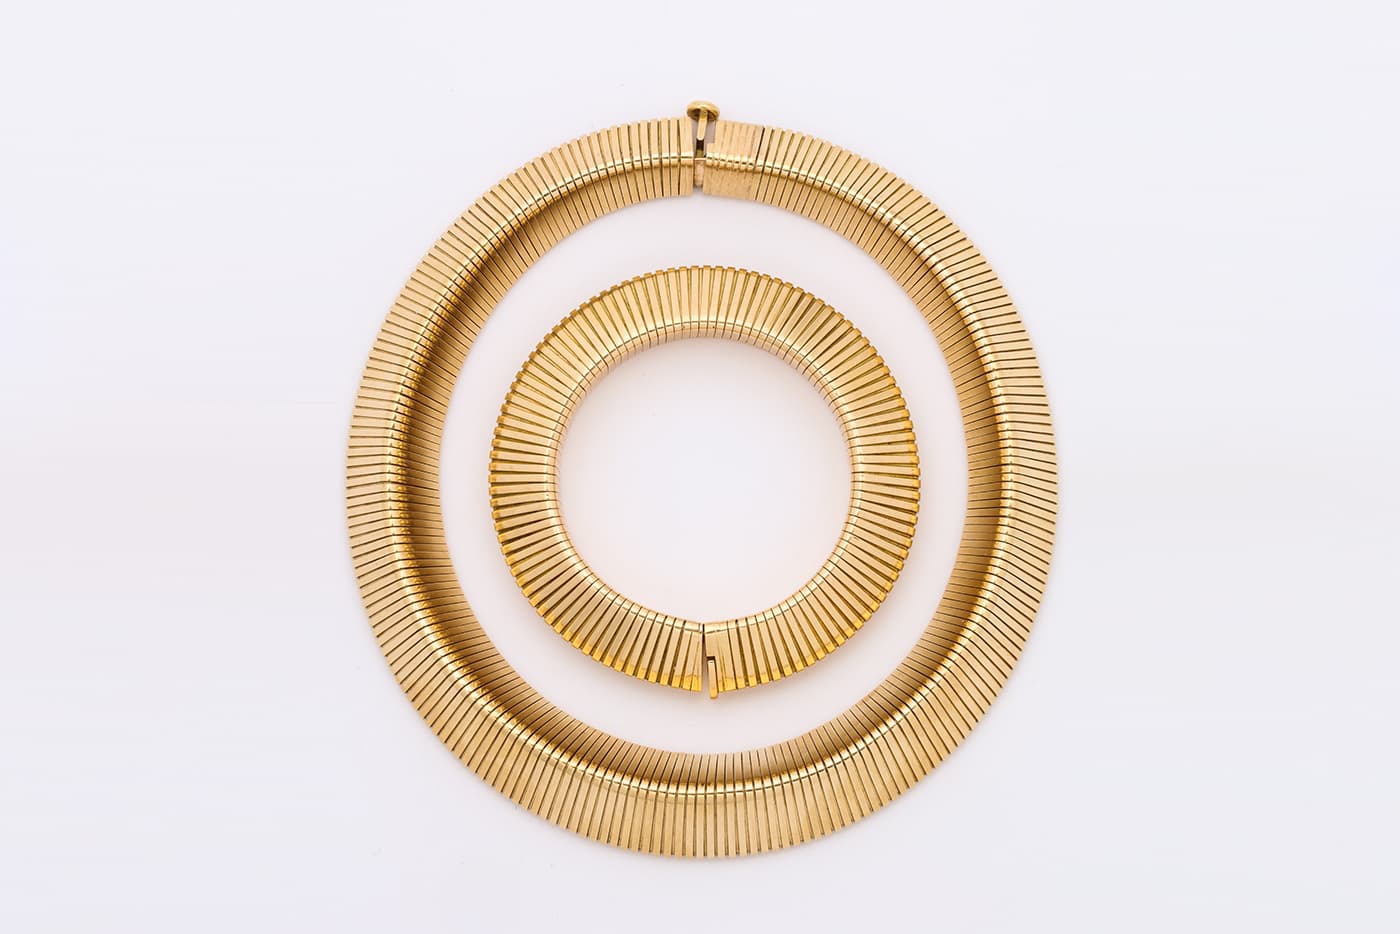 Cartier bracelet and necklace in yellow gold offered by A La Vieille Russie